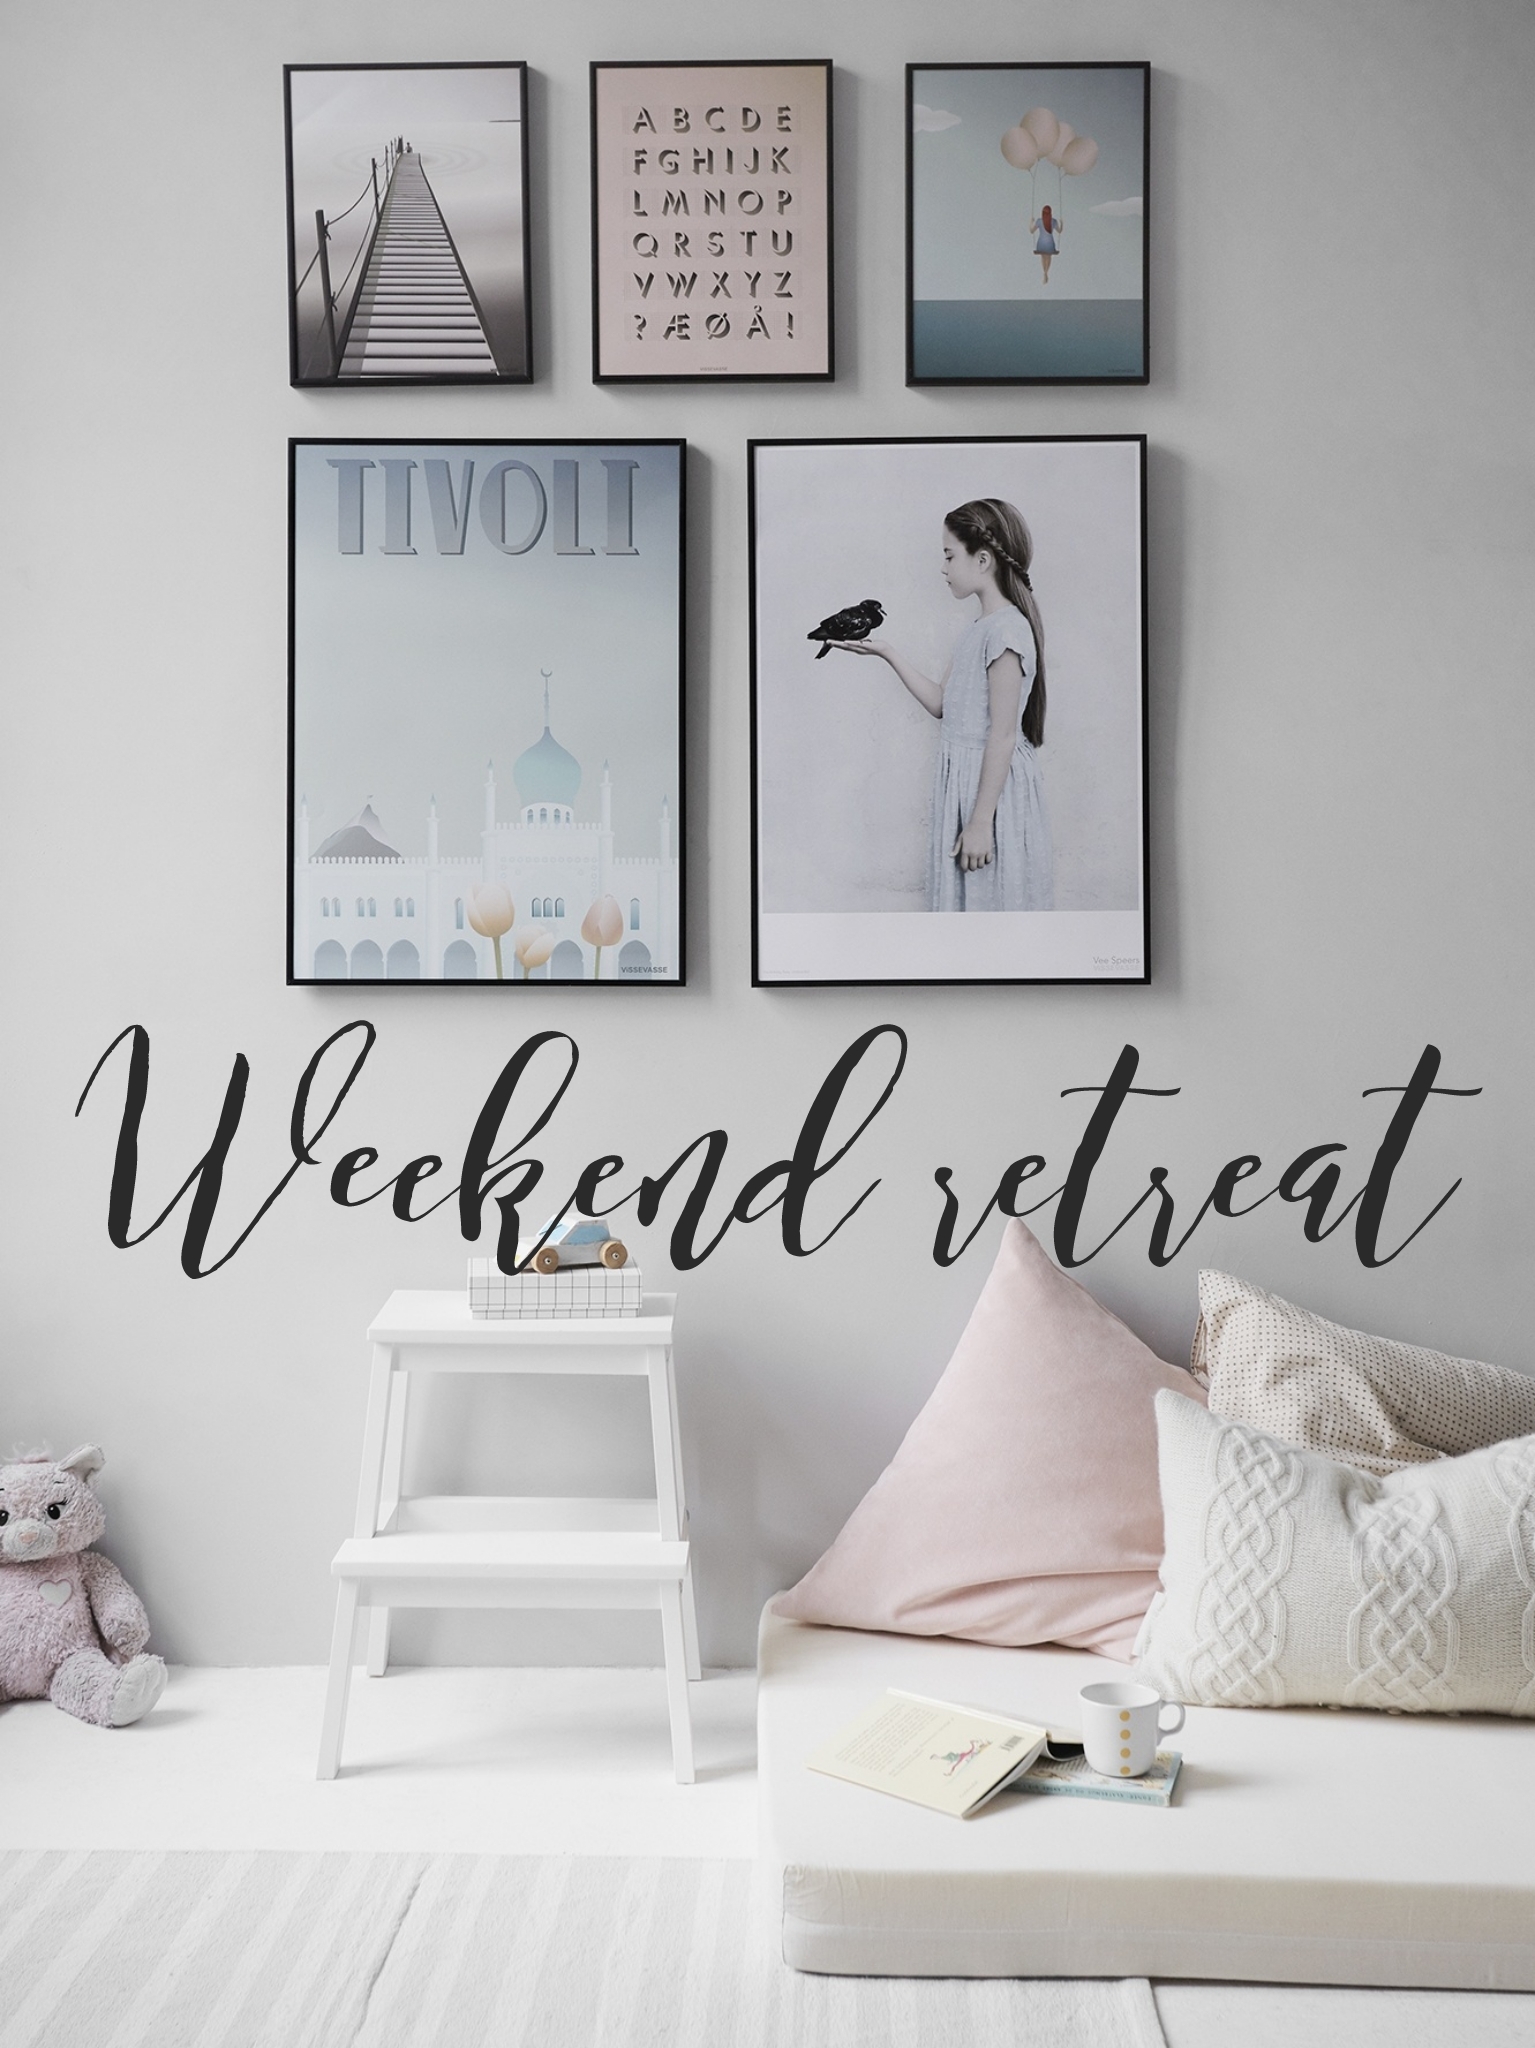 7 ways to Make your Home a Weekend Retreat